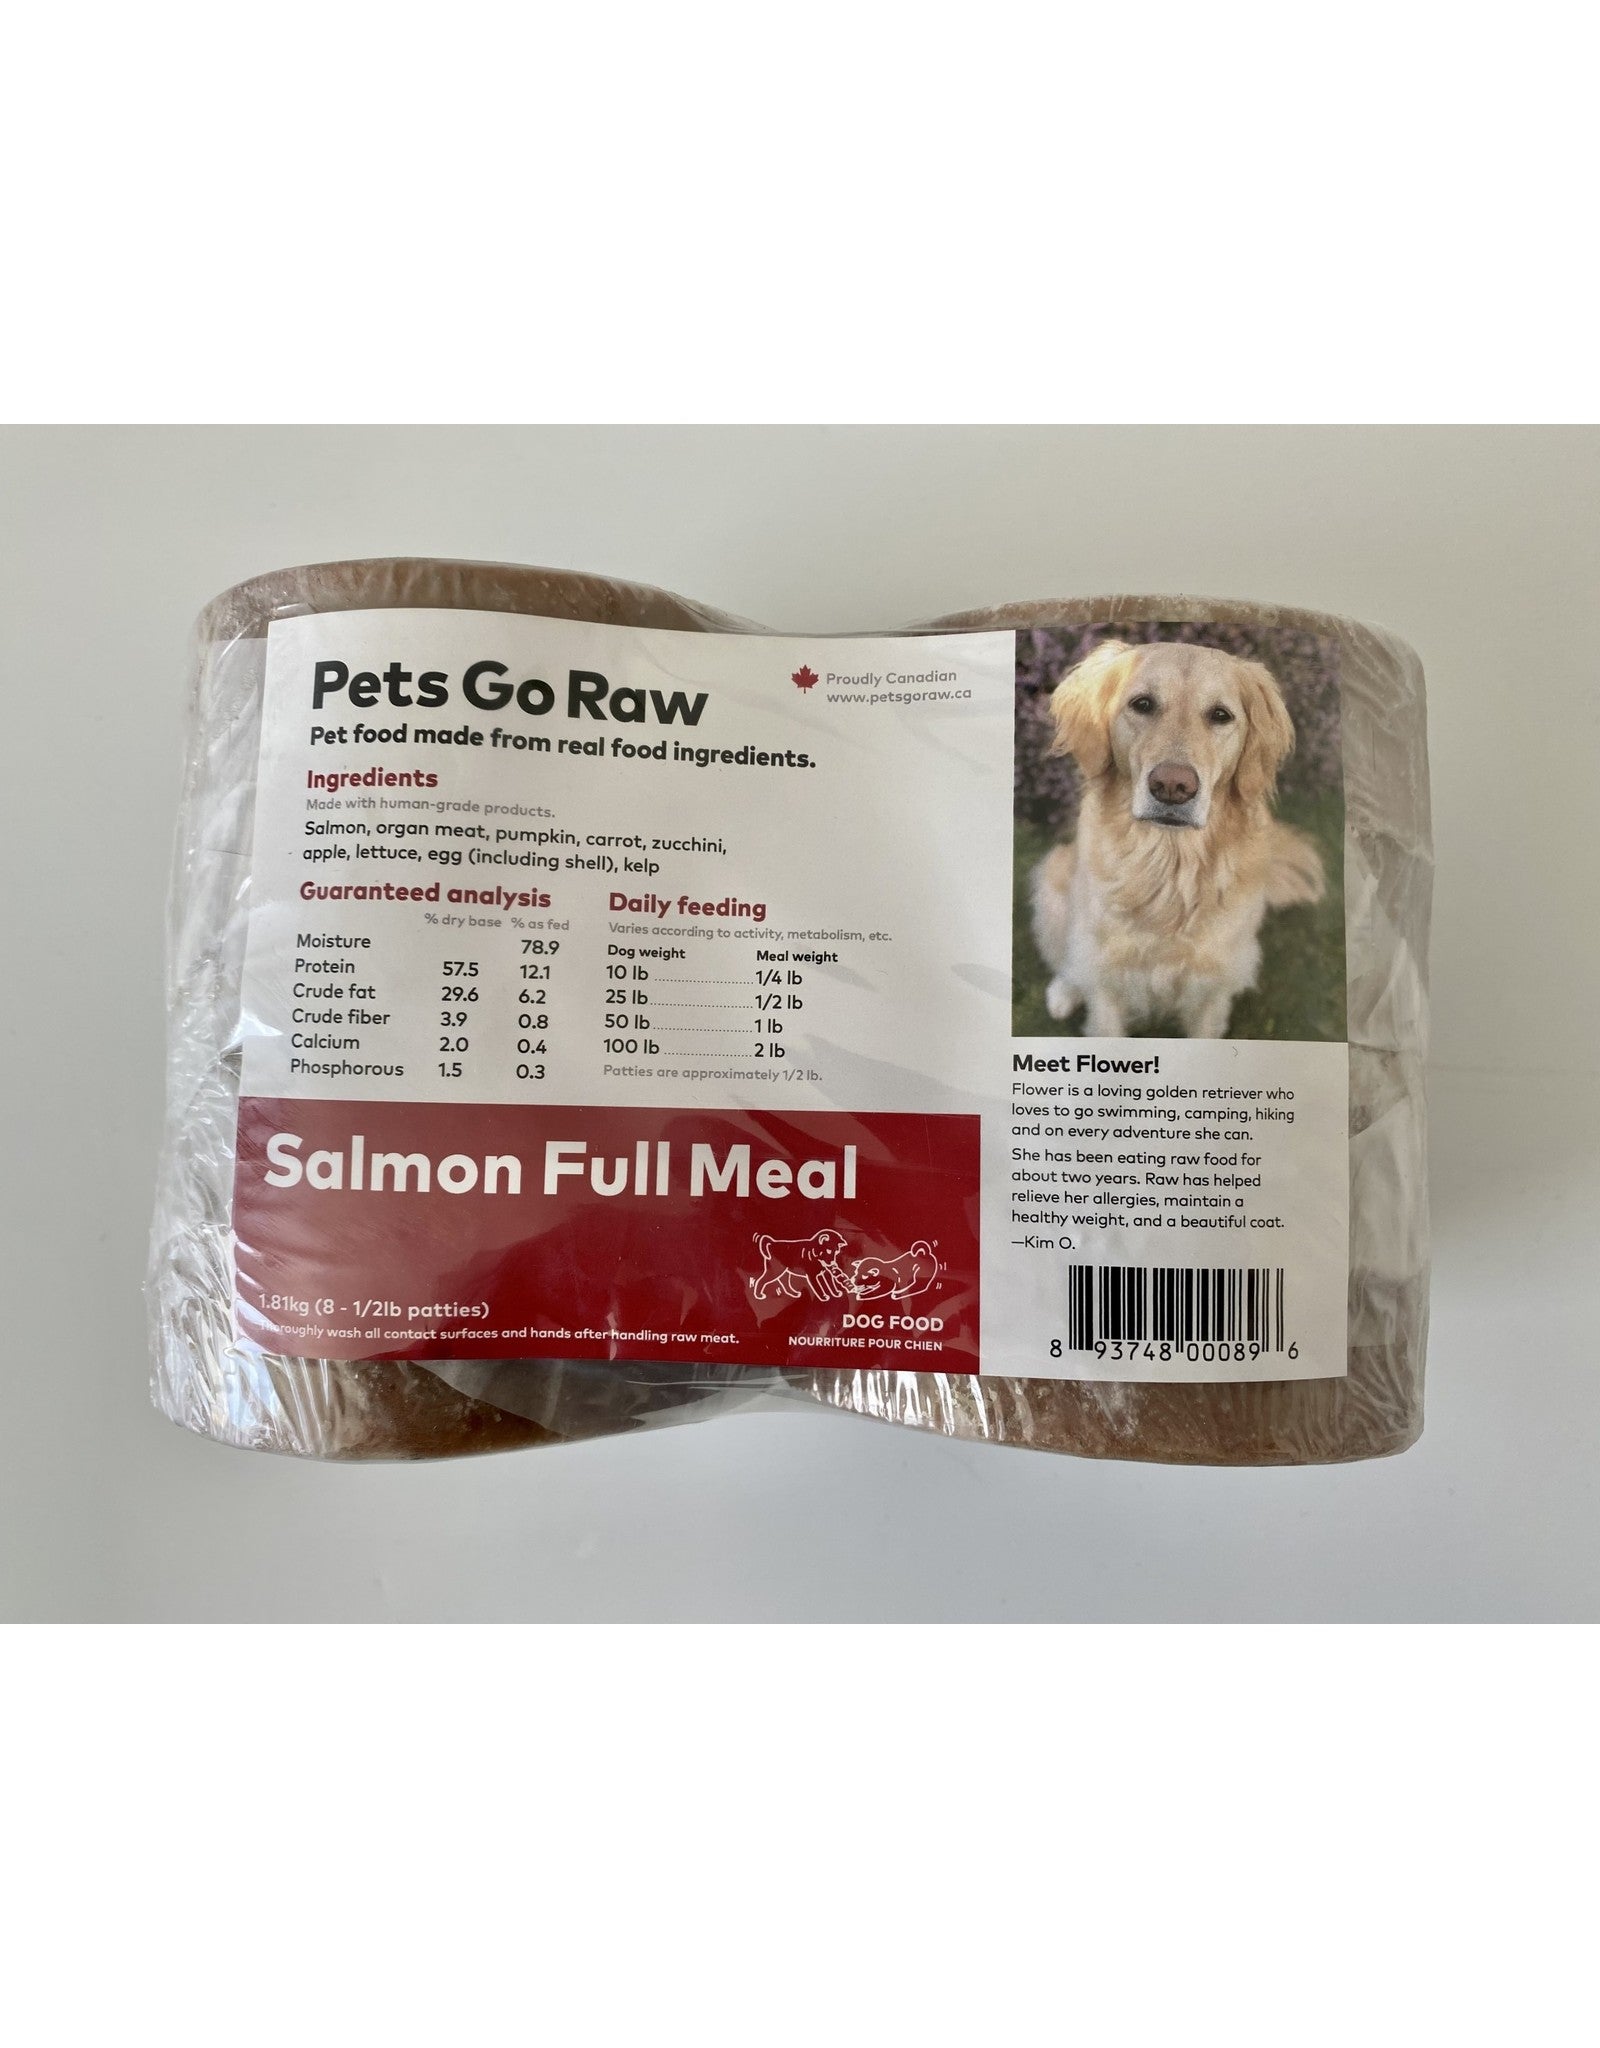 Pets Go Raw - Salmon Full Meal - 1/2lb Portions - 4lbs